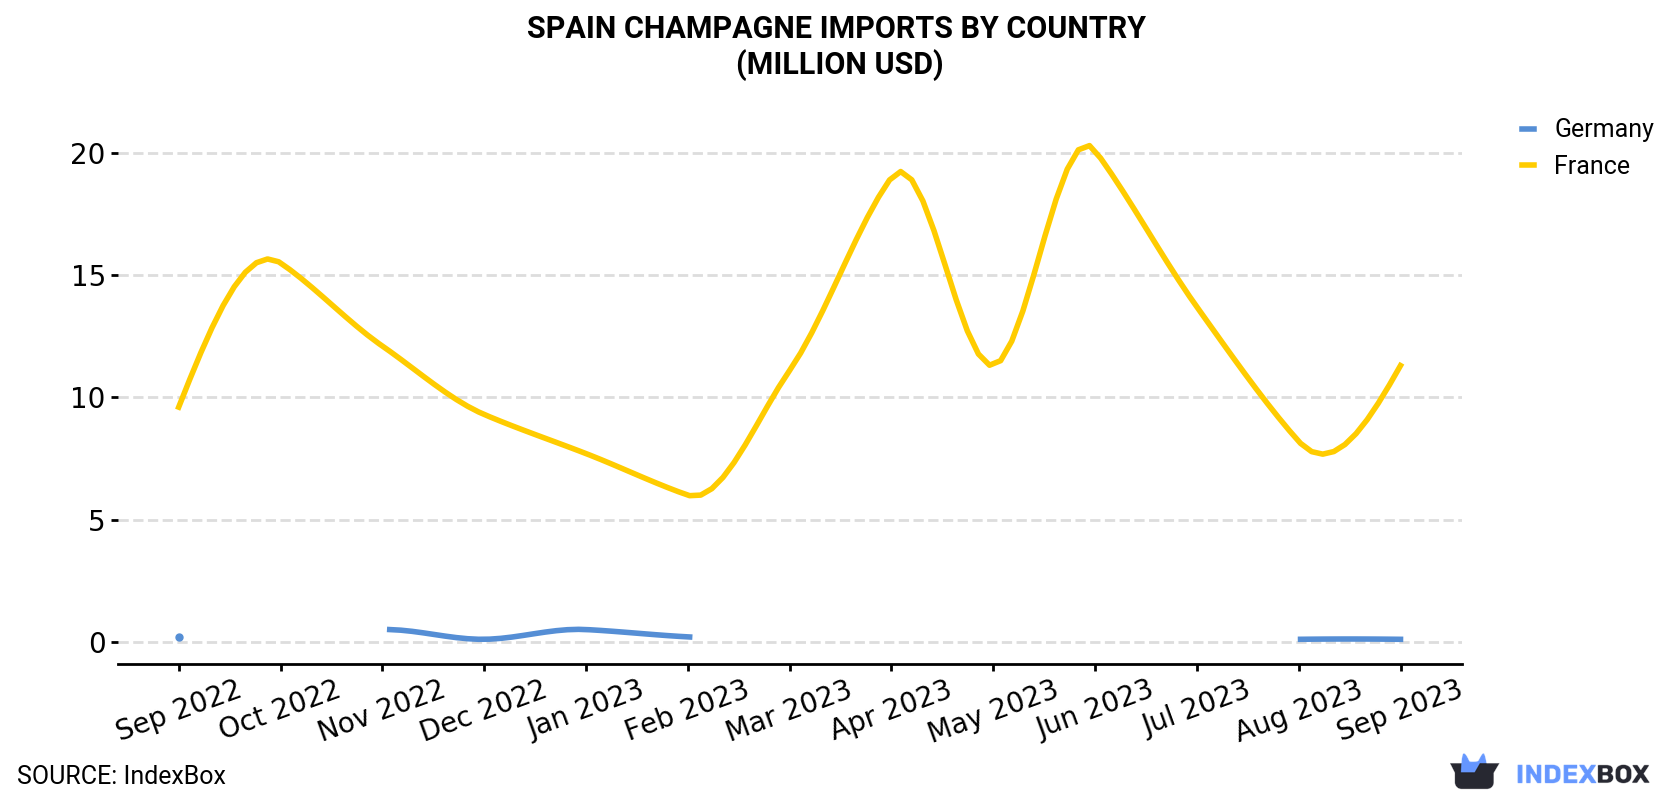 Spain Champagne Imports By Country (Million USD)